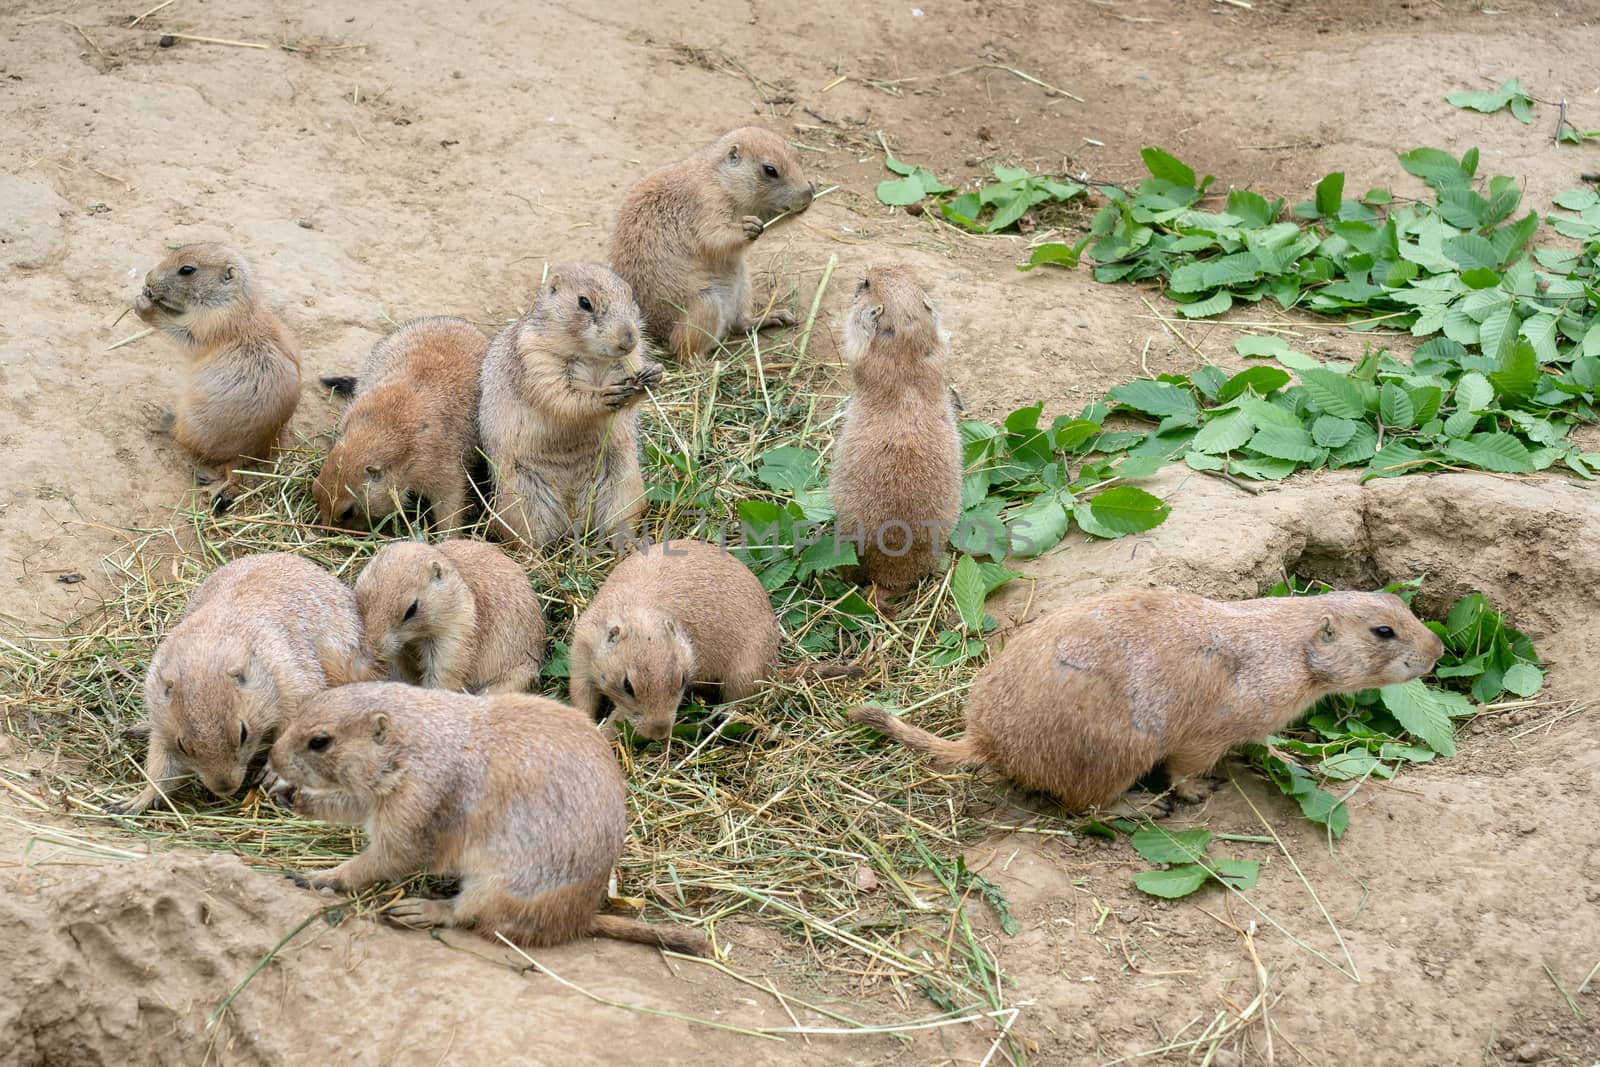 Prairie dogs (Cynomys ludovicianus) sit and nibble the leaves from twigs